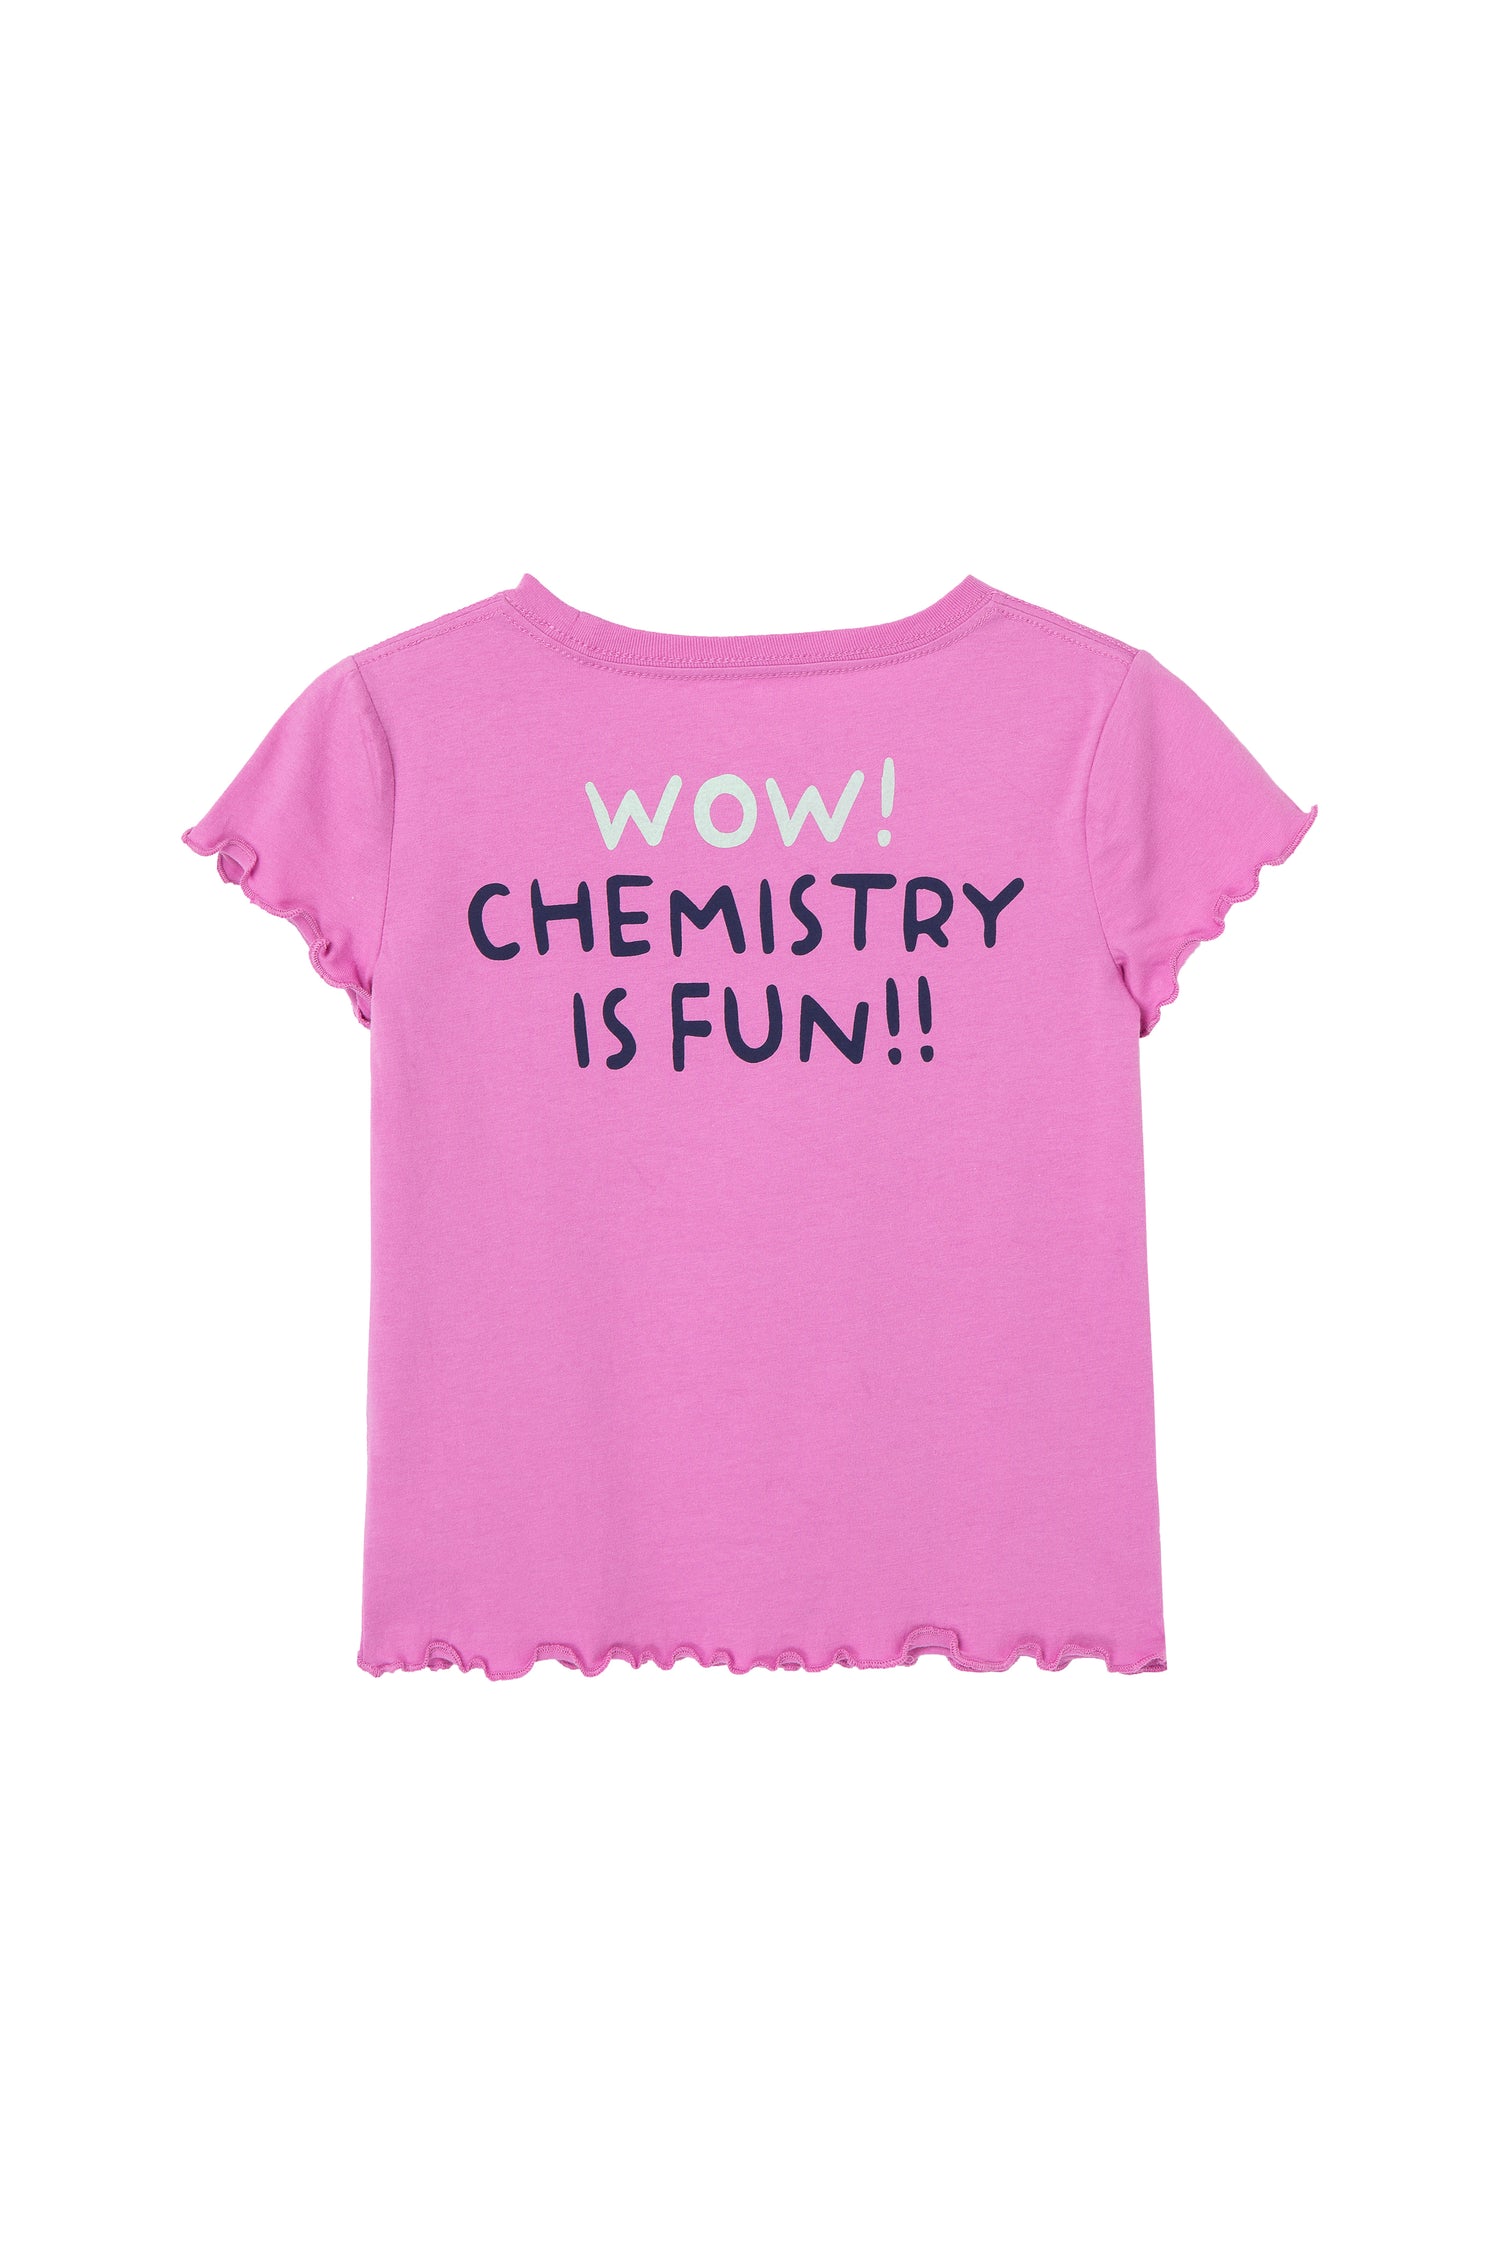 Pink tee shirt with ruffled short sleeve, "wow! chemistry is fun!!" text on front